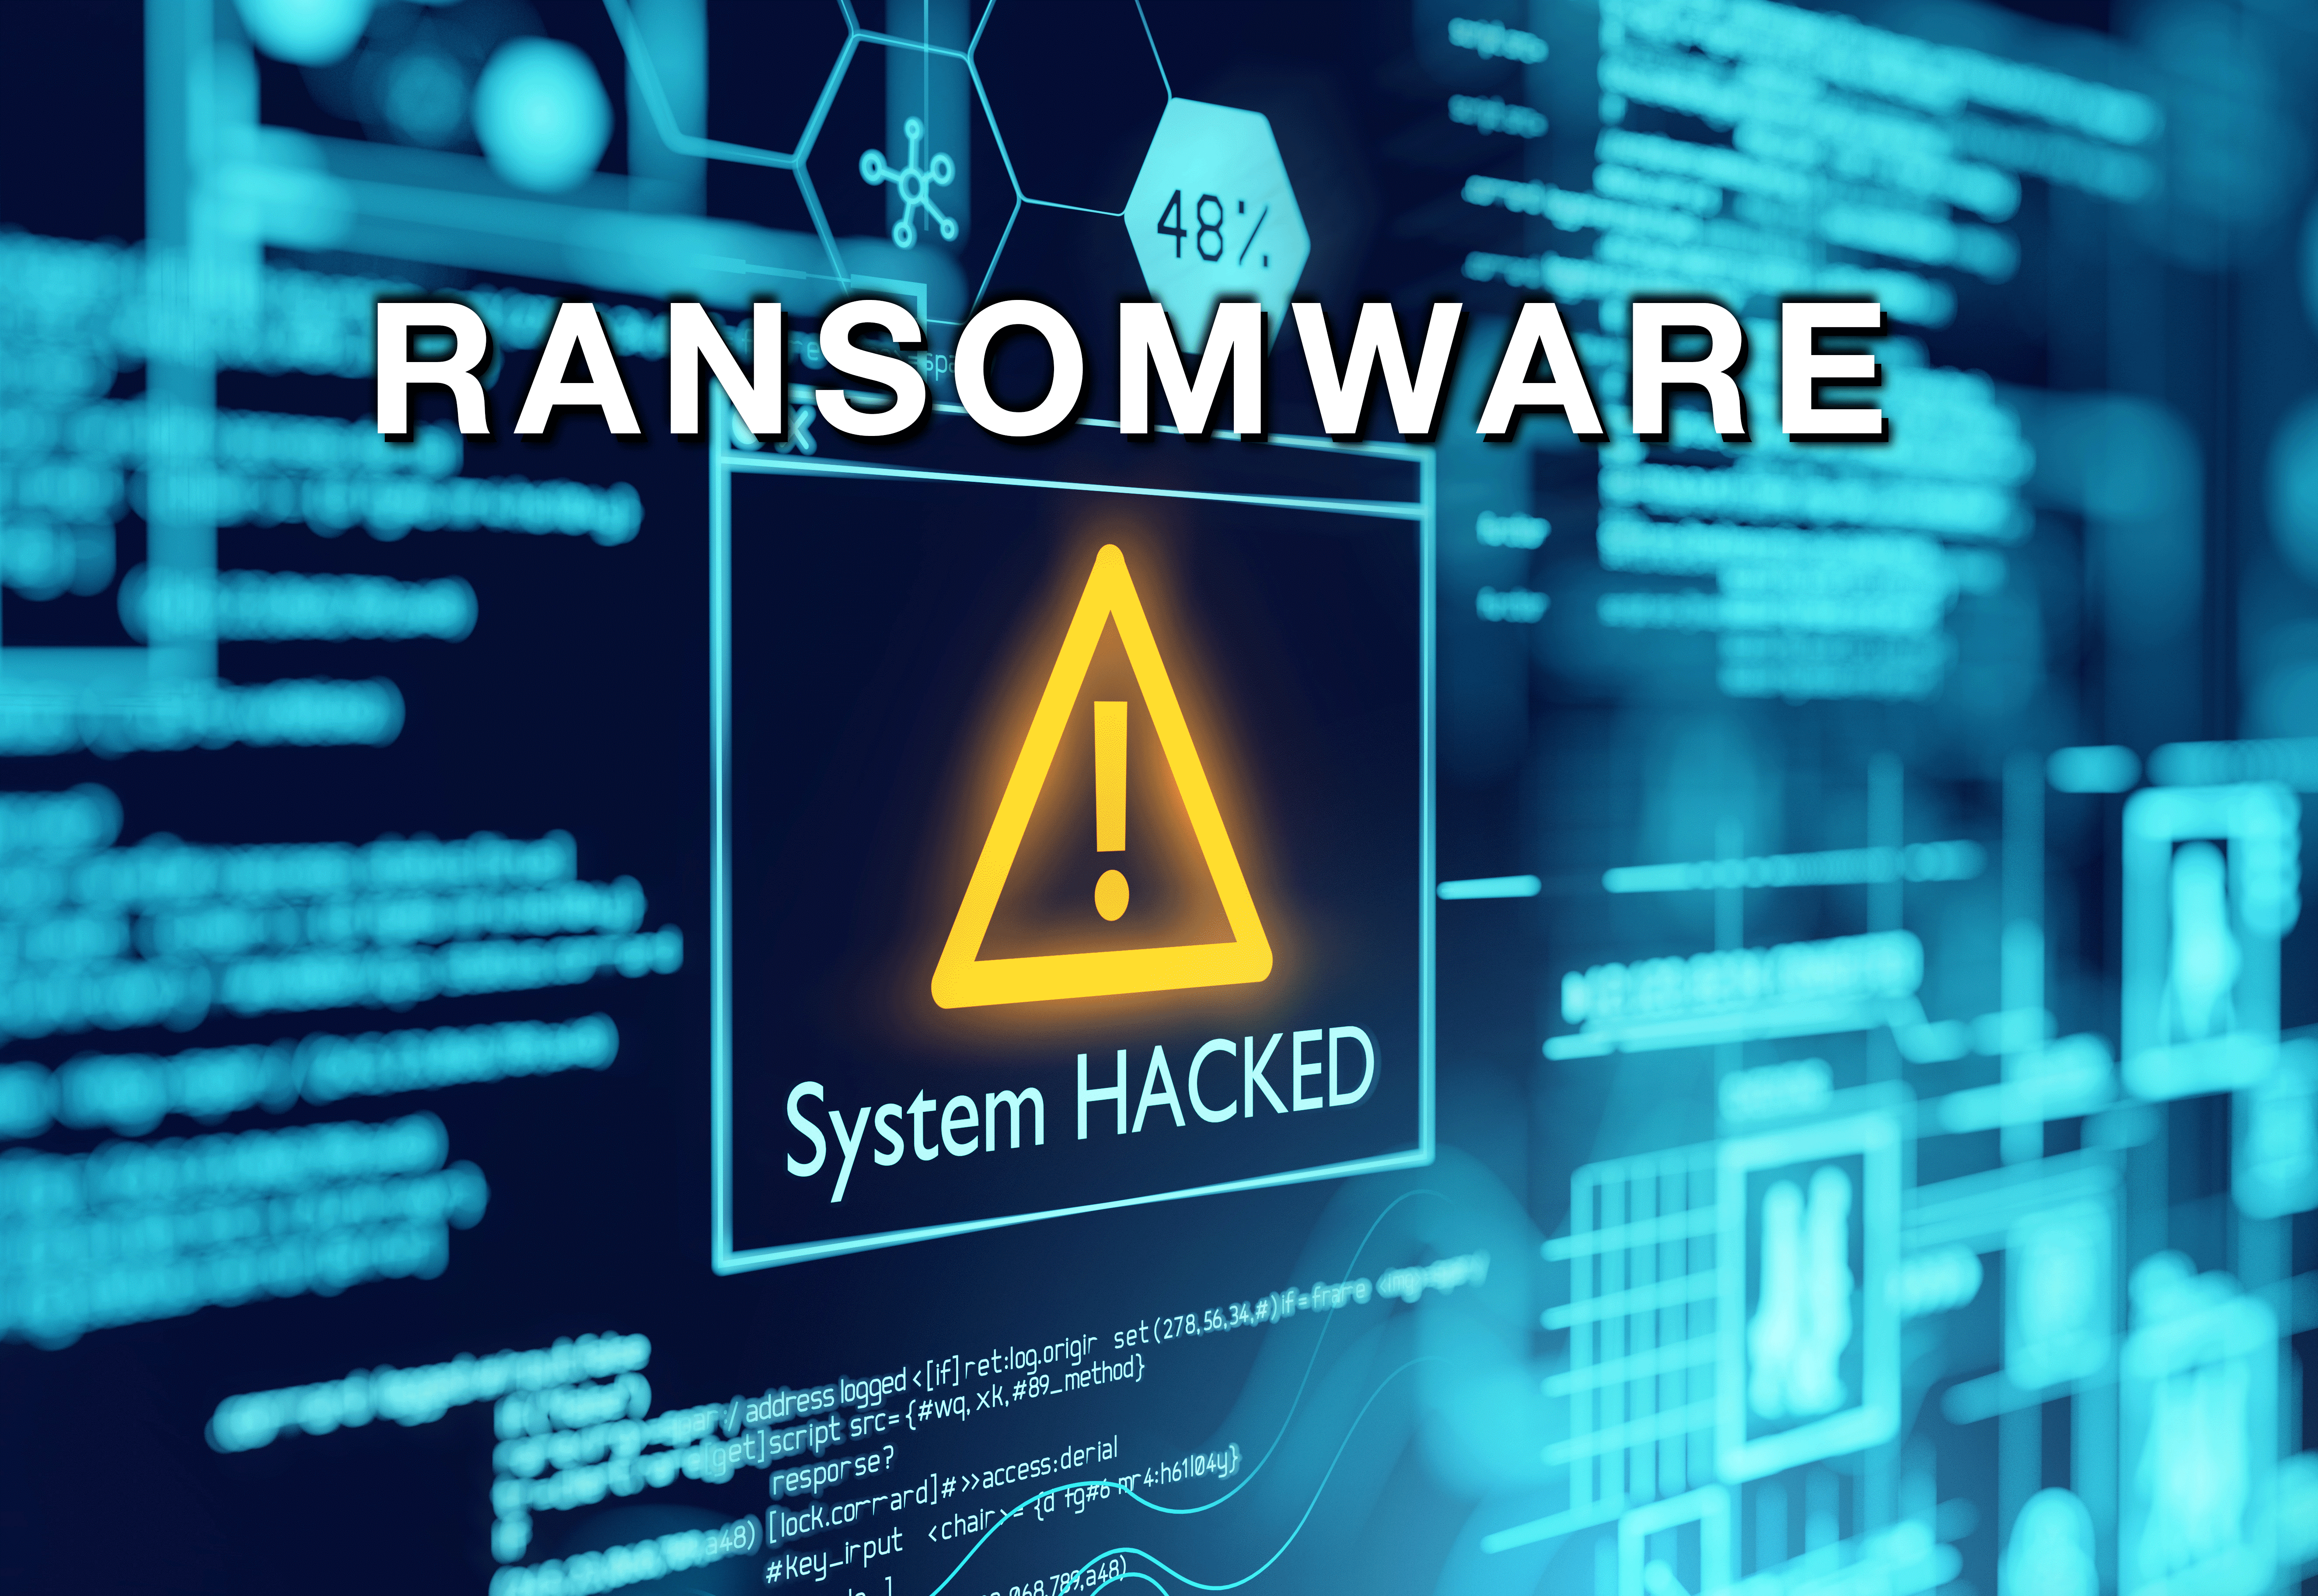 Small businesses: Take action to protect against ransomware threats today